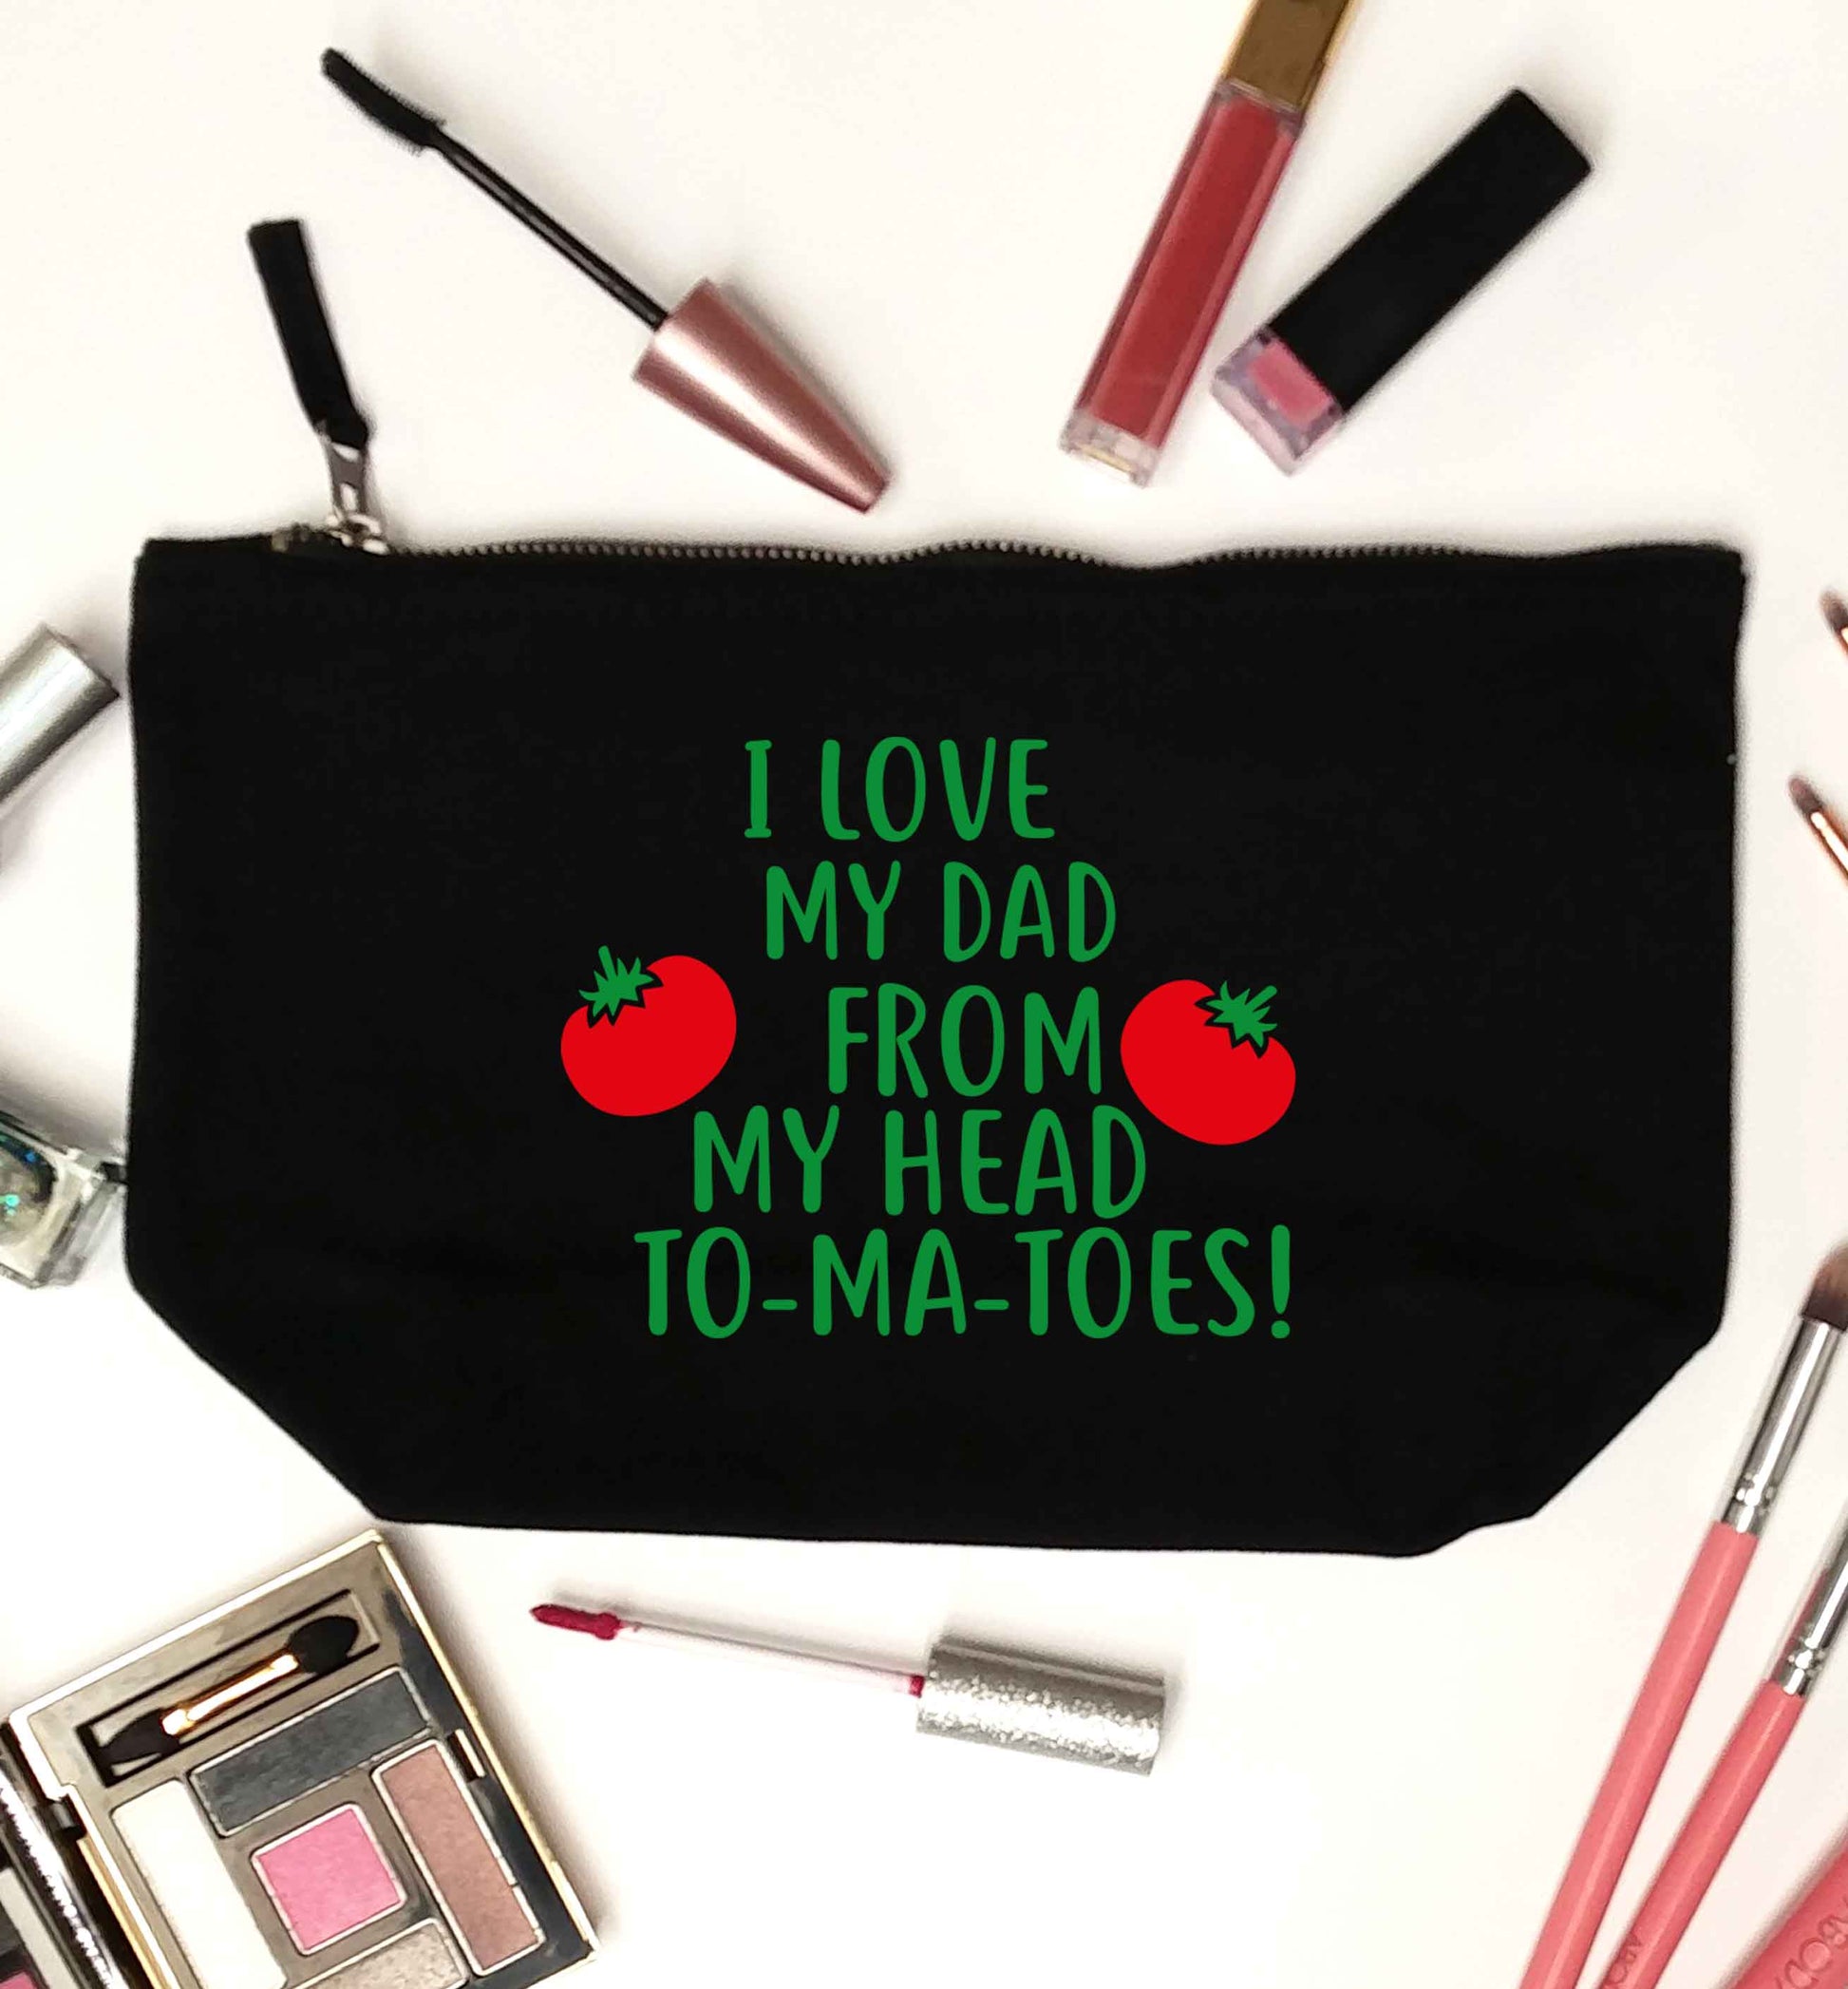 I love my dad from my head to-ma-toes black makeup bag